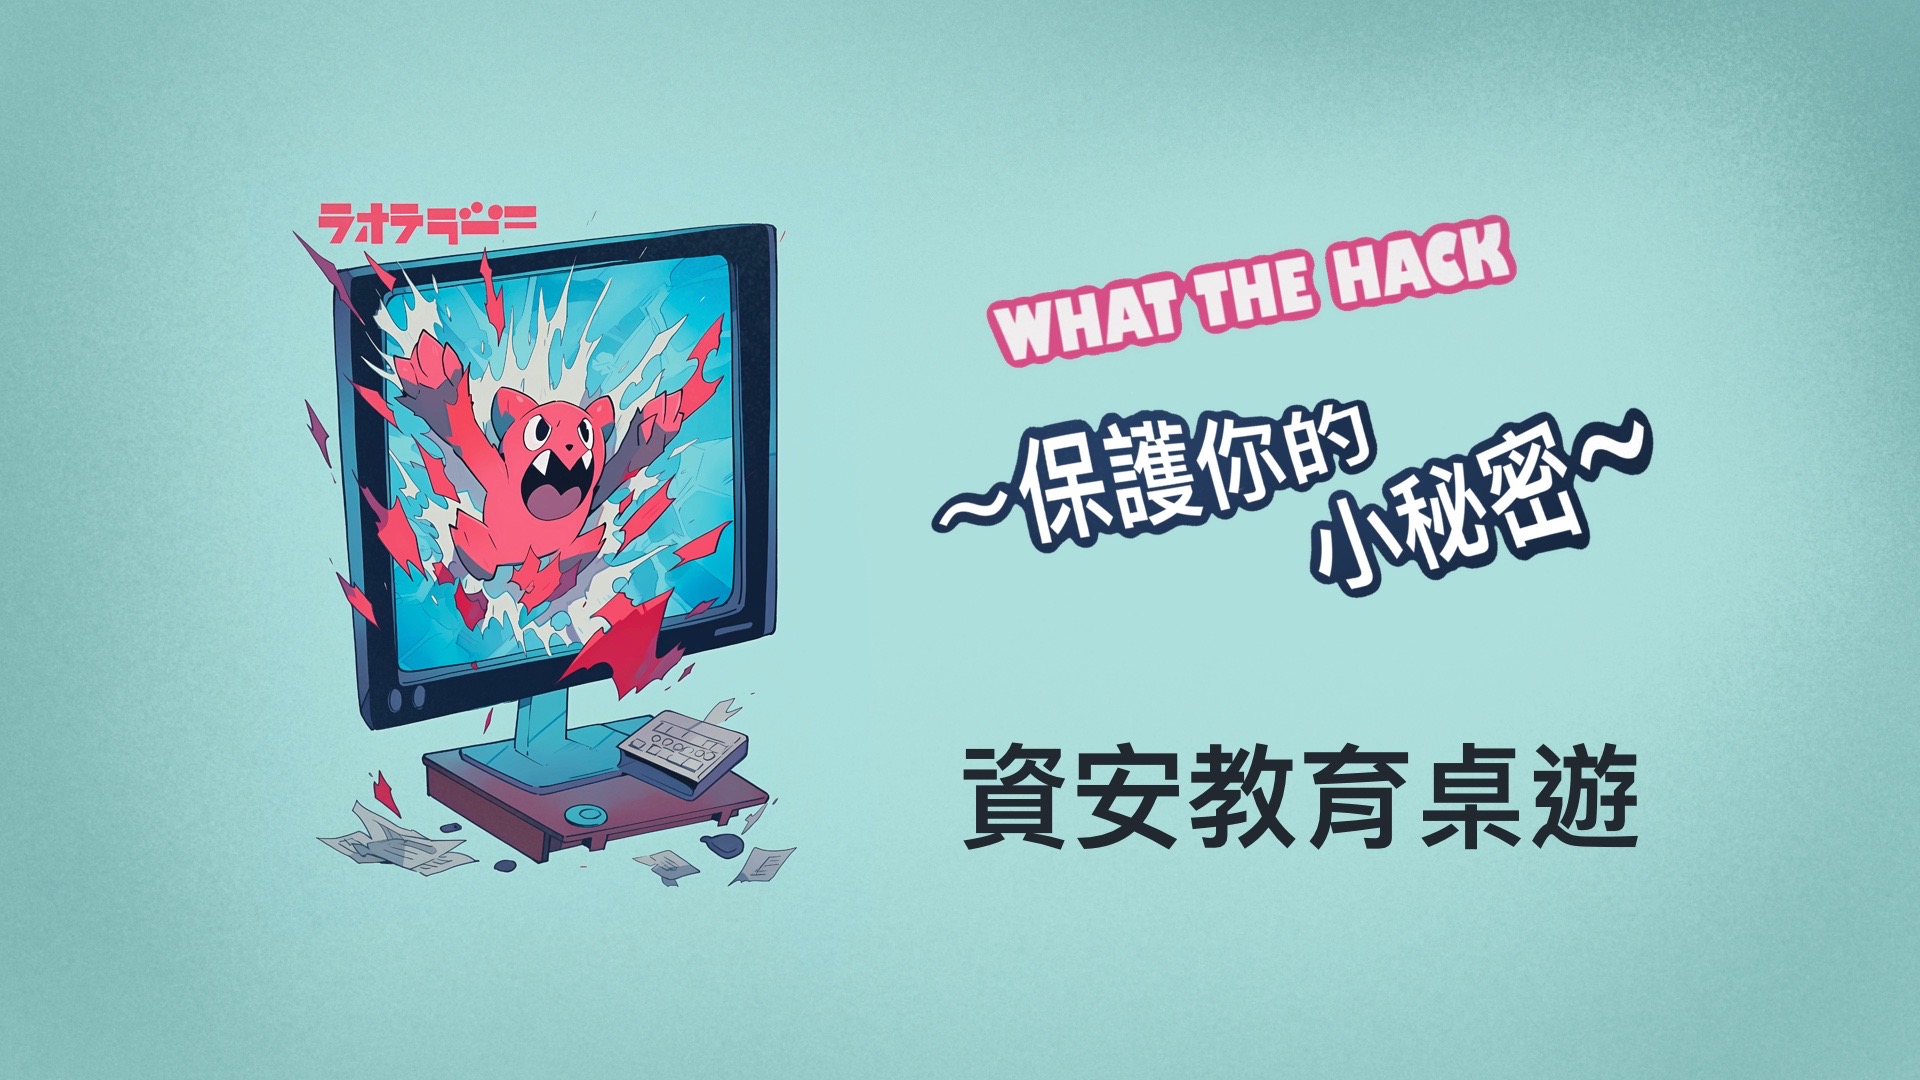 WHAT THE HACK ~保護你的小秘密~